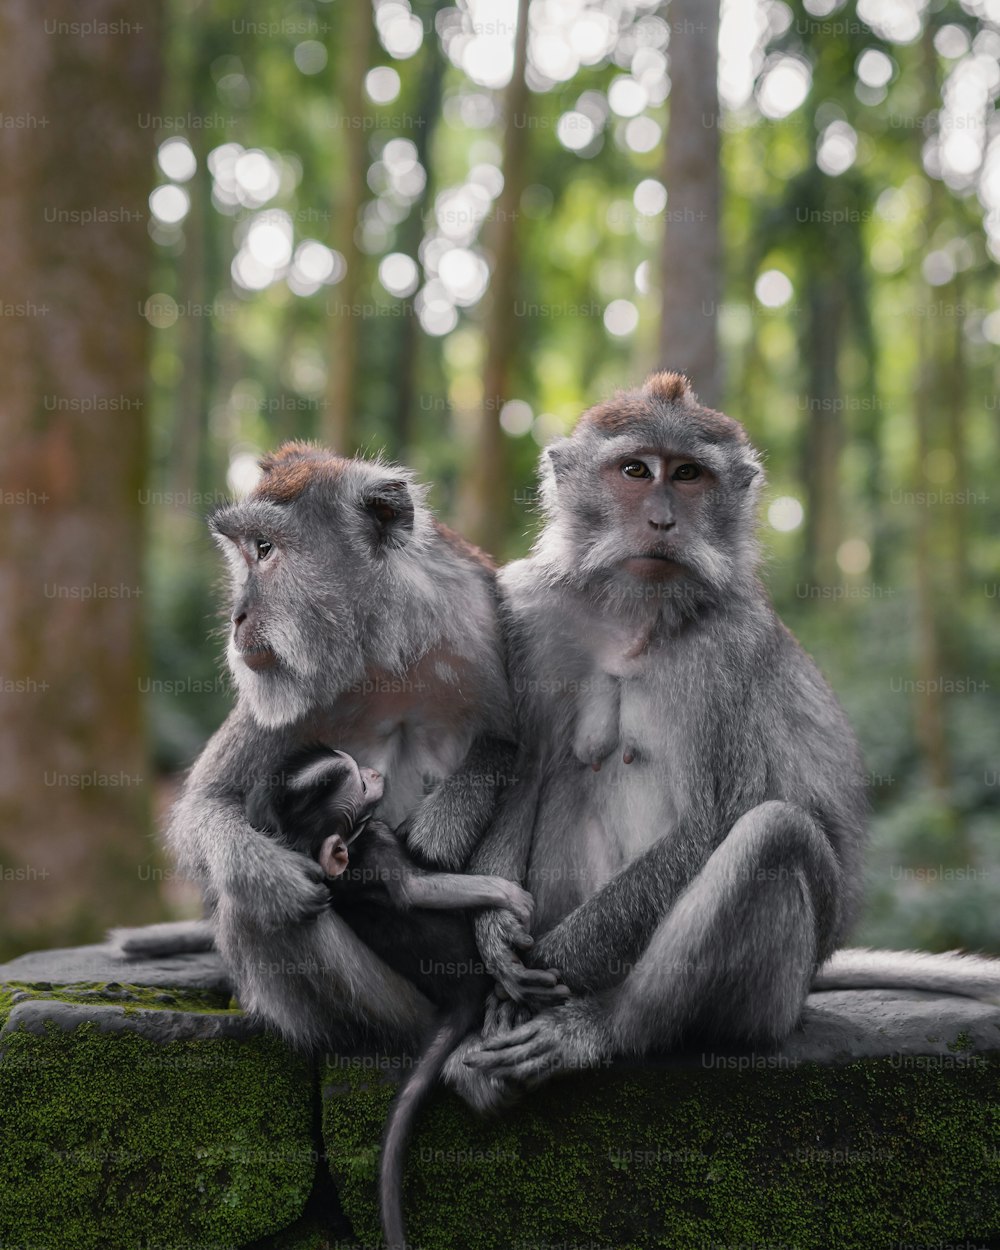 two monkeys sitting on a rock in a forest